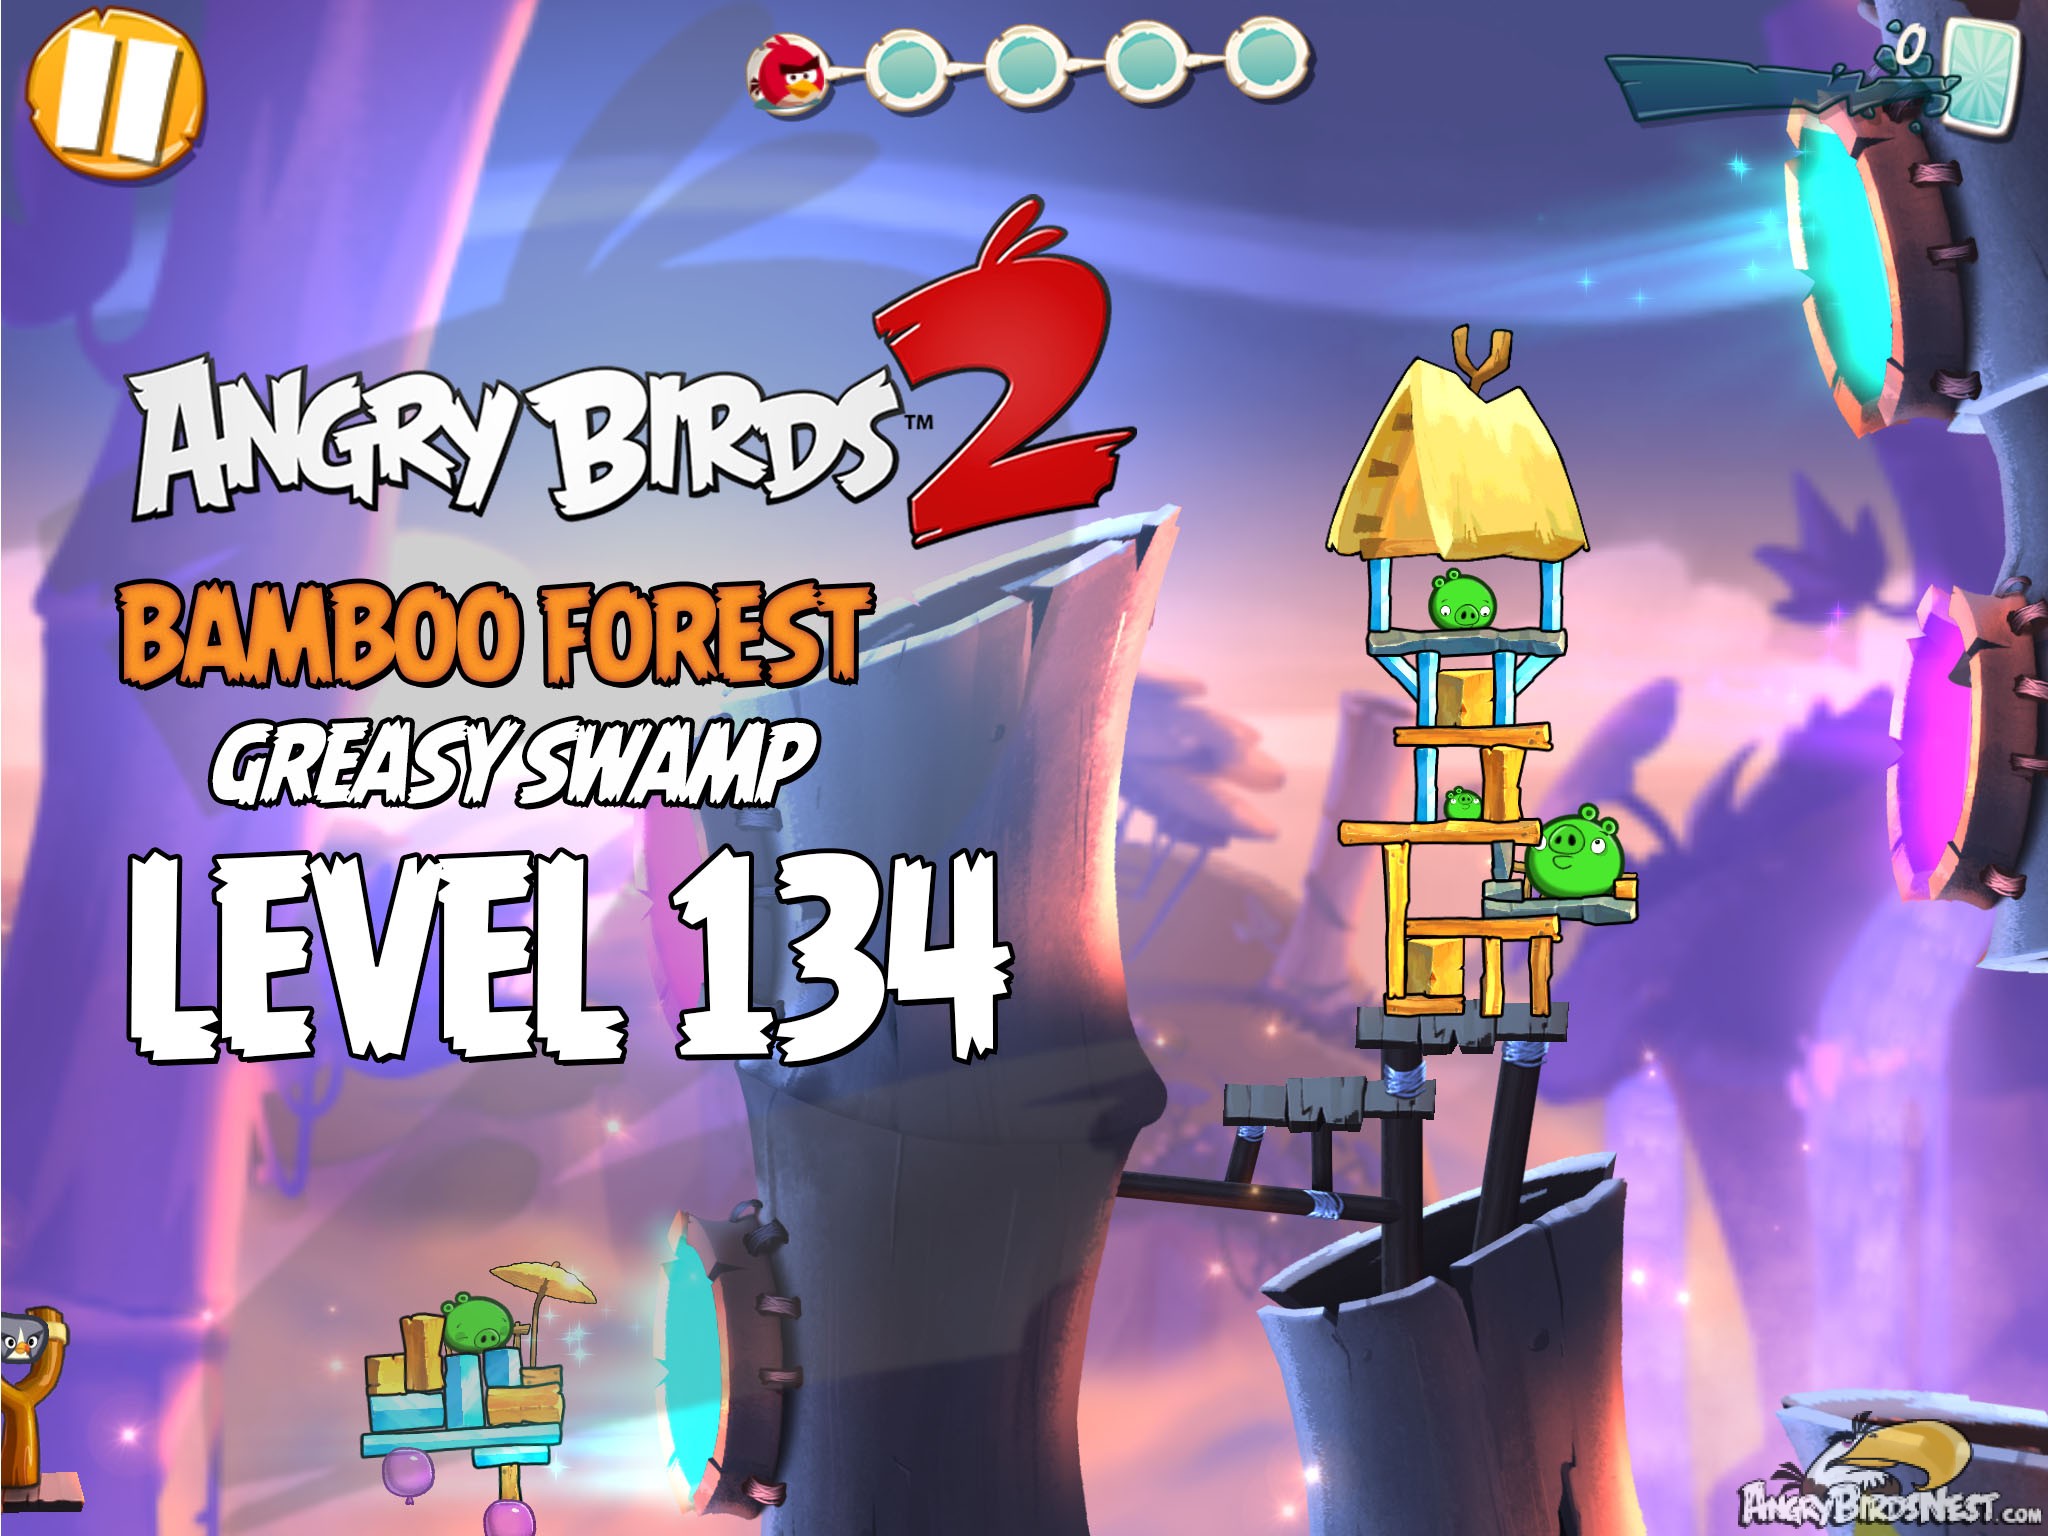 Angry Birds 2 Bamboo Forest Greasy Swamp Level 134